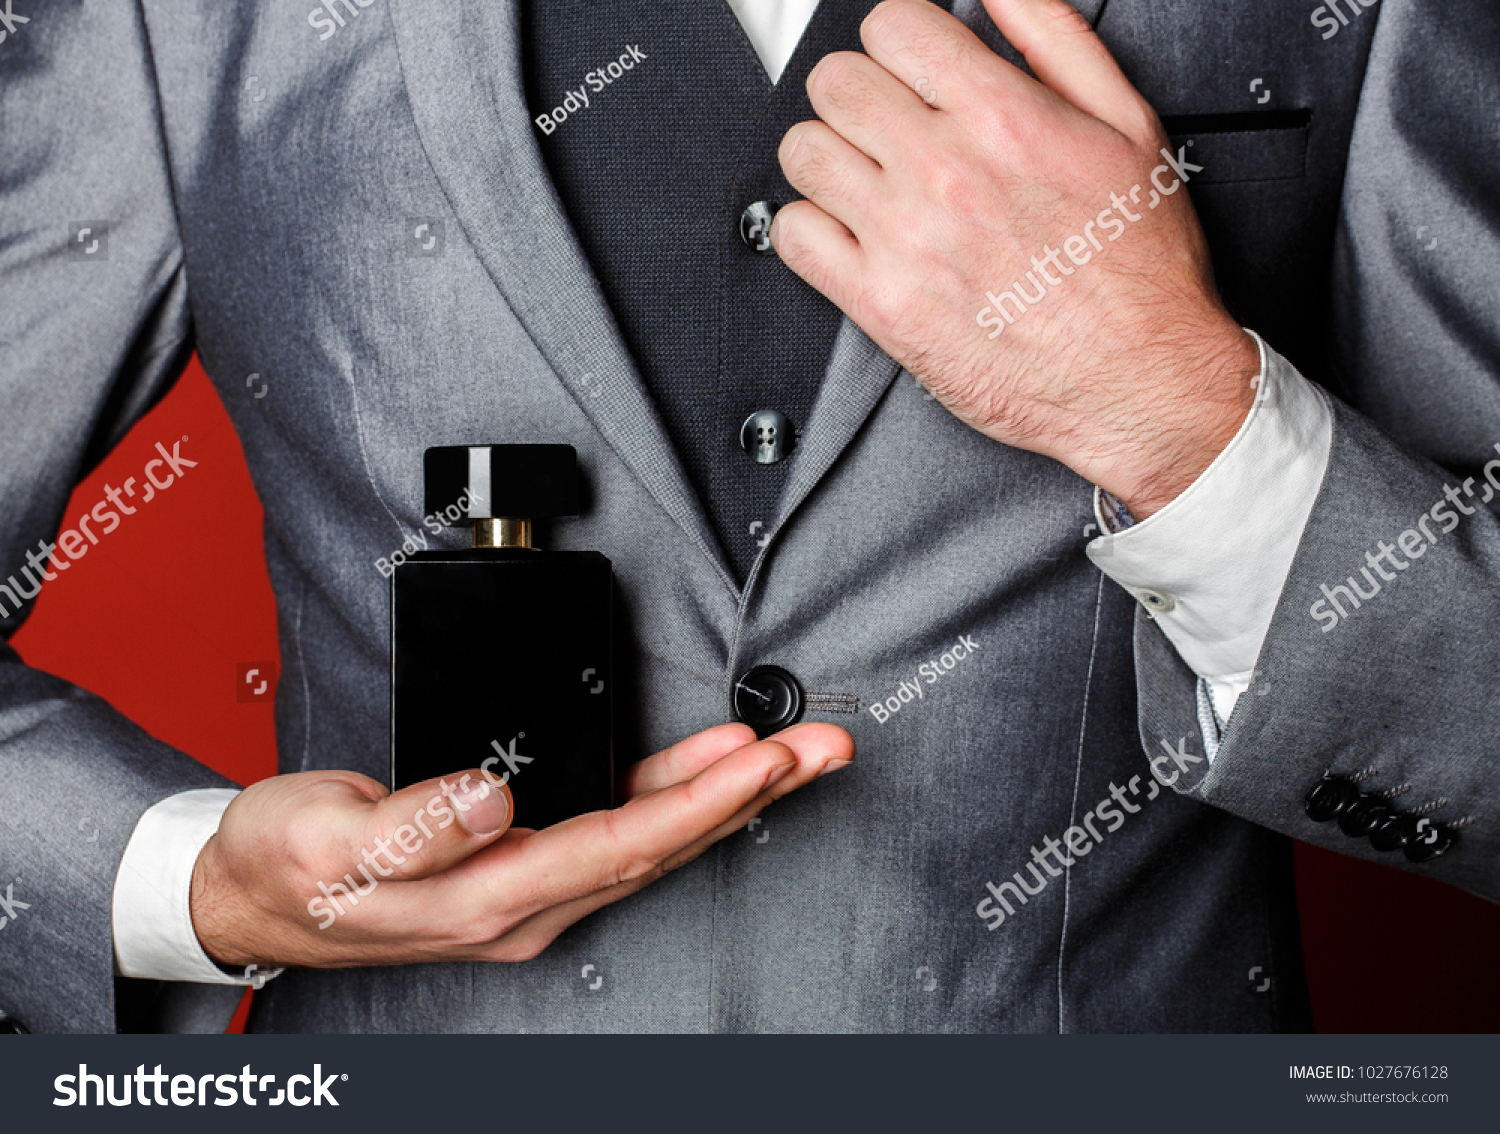 Fragrance smell. Male fragrance, perfumery, cosmetics. Smell perfume. Expensive suit. Rich man prefers expensive fragrance smell. Man scent perfume. Perfume or cologne bottle. Fashion cologne bottle. #1027676128